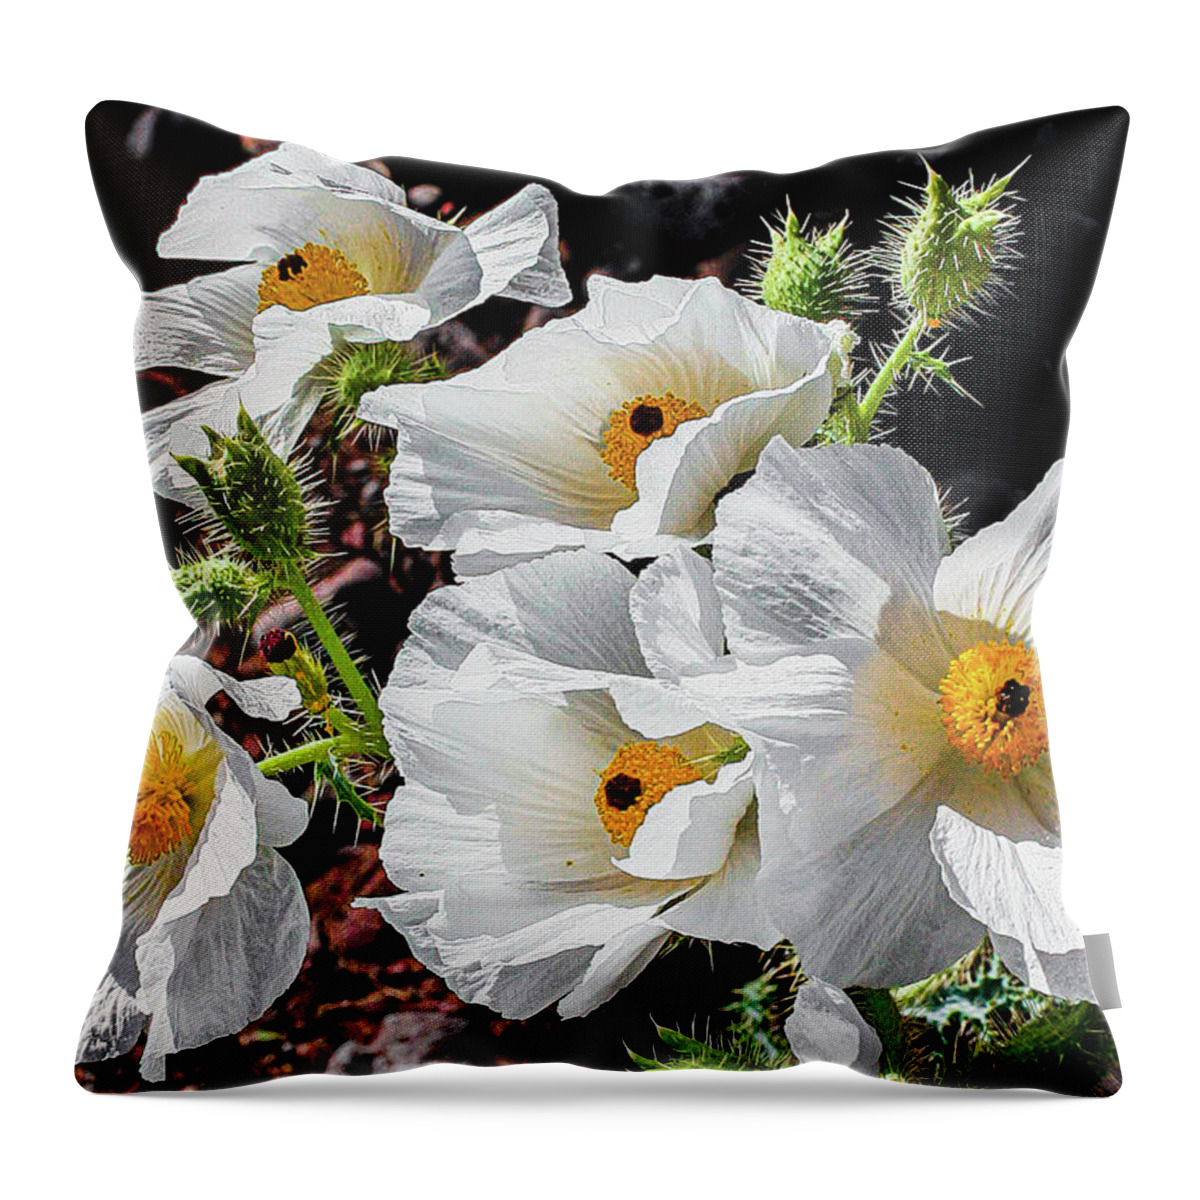 Flowers Throw Pillow featuring the photograph Blowen In The Wind by Claude Dalley